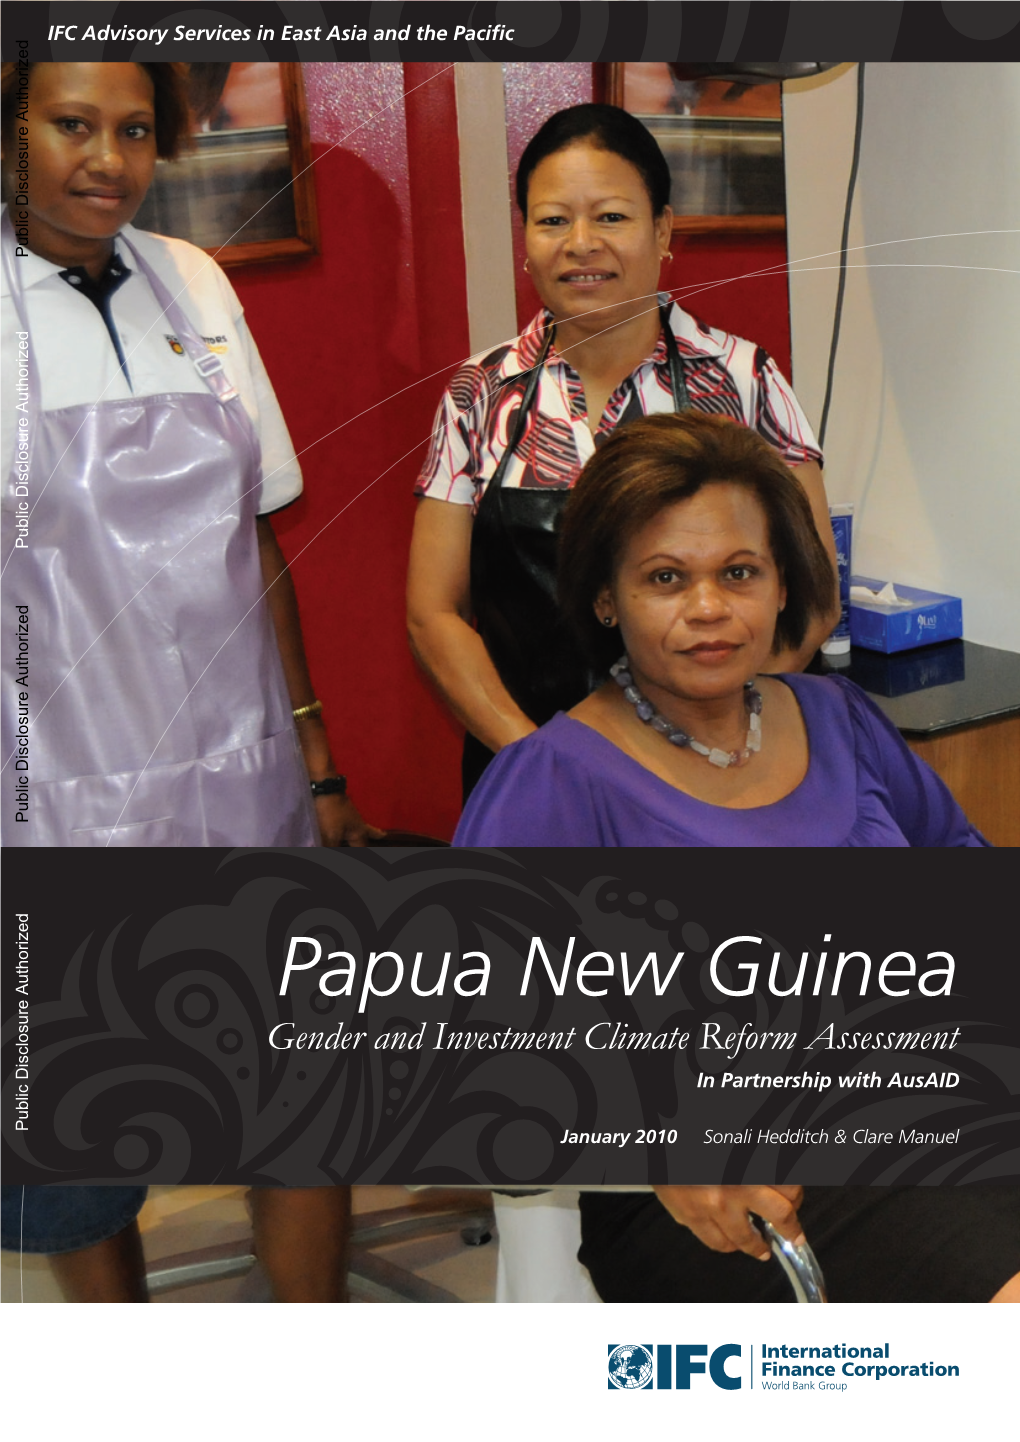 Gender and Investment Climate Reform Assessment in Partnership with Ausaid